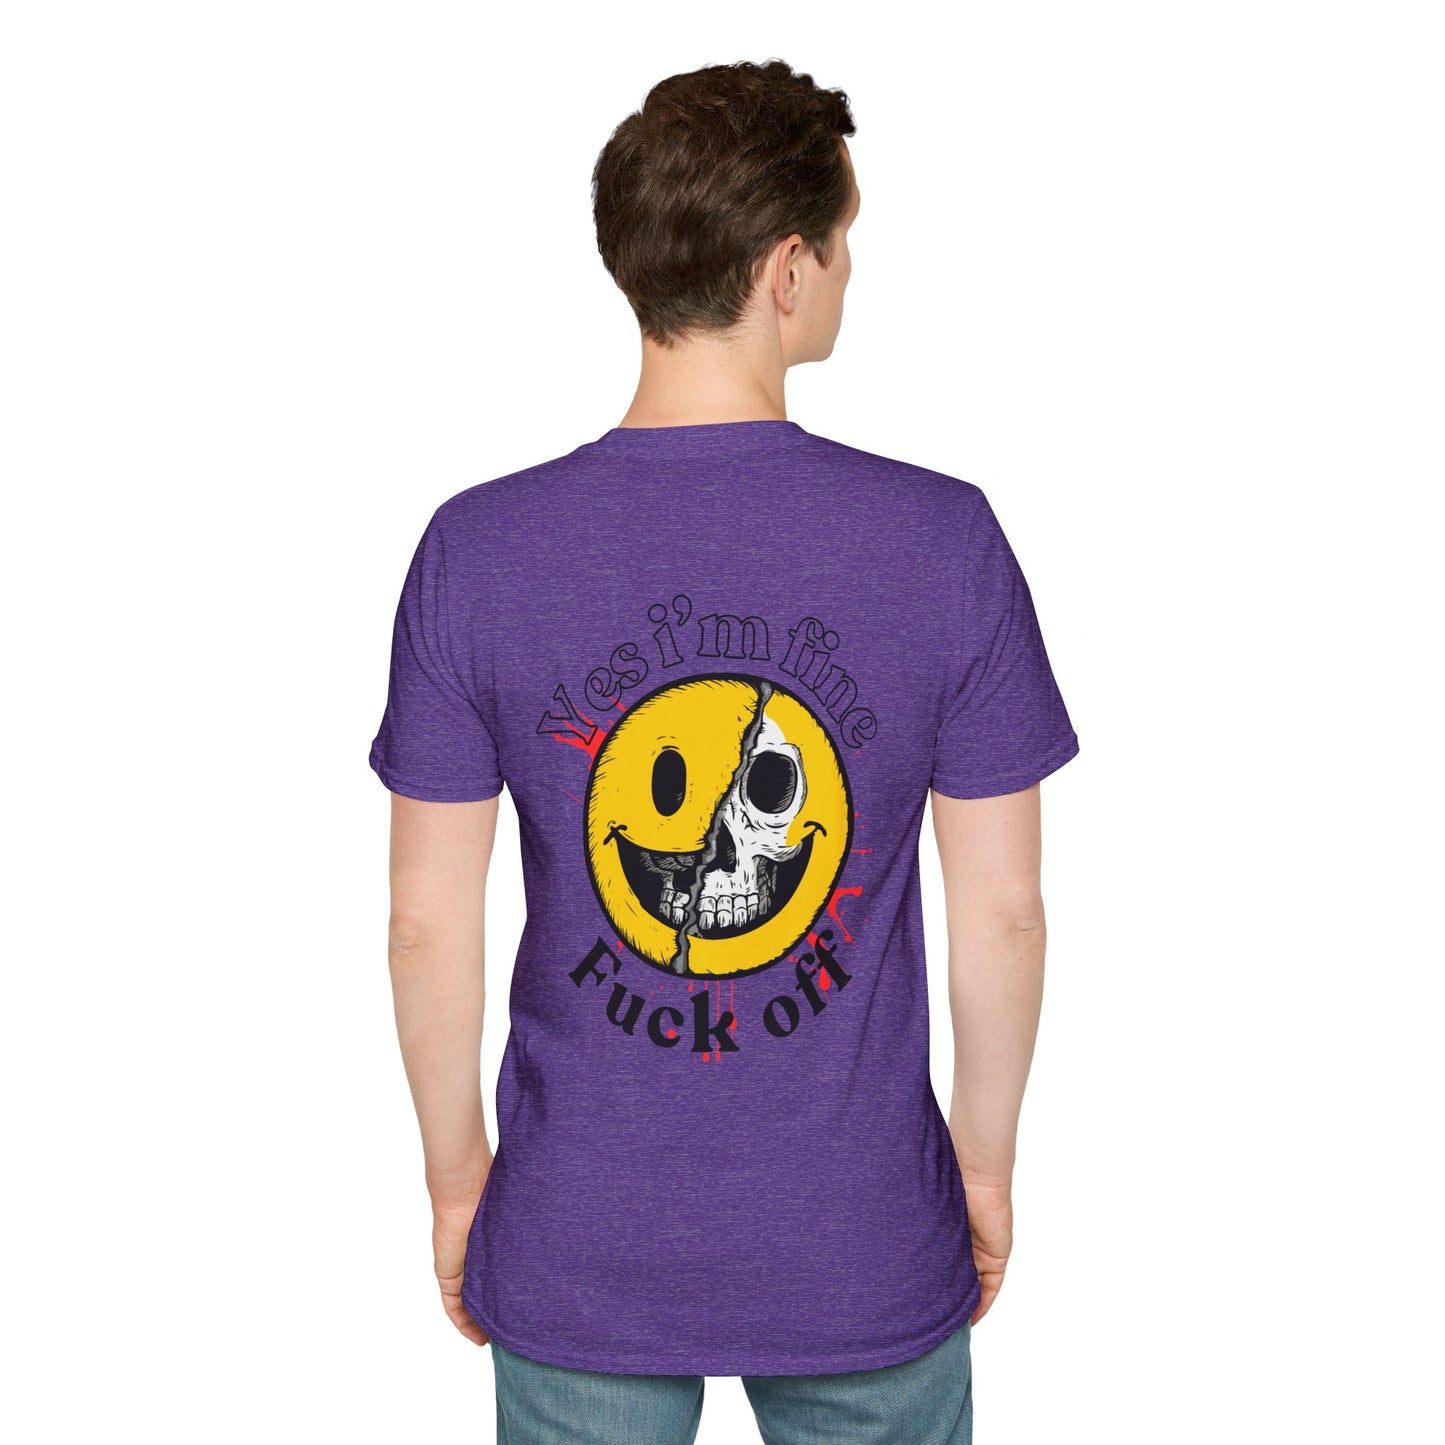 Violet T-shirt with a half smiley, half skull design and bold text 'Yes I'm Fine' and 'Fuck Off' 